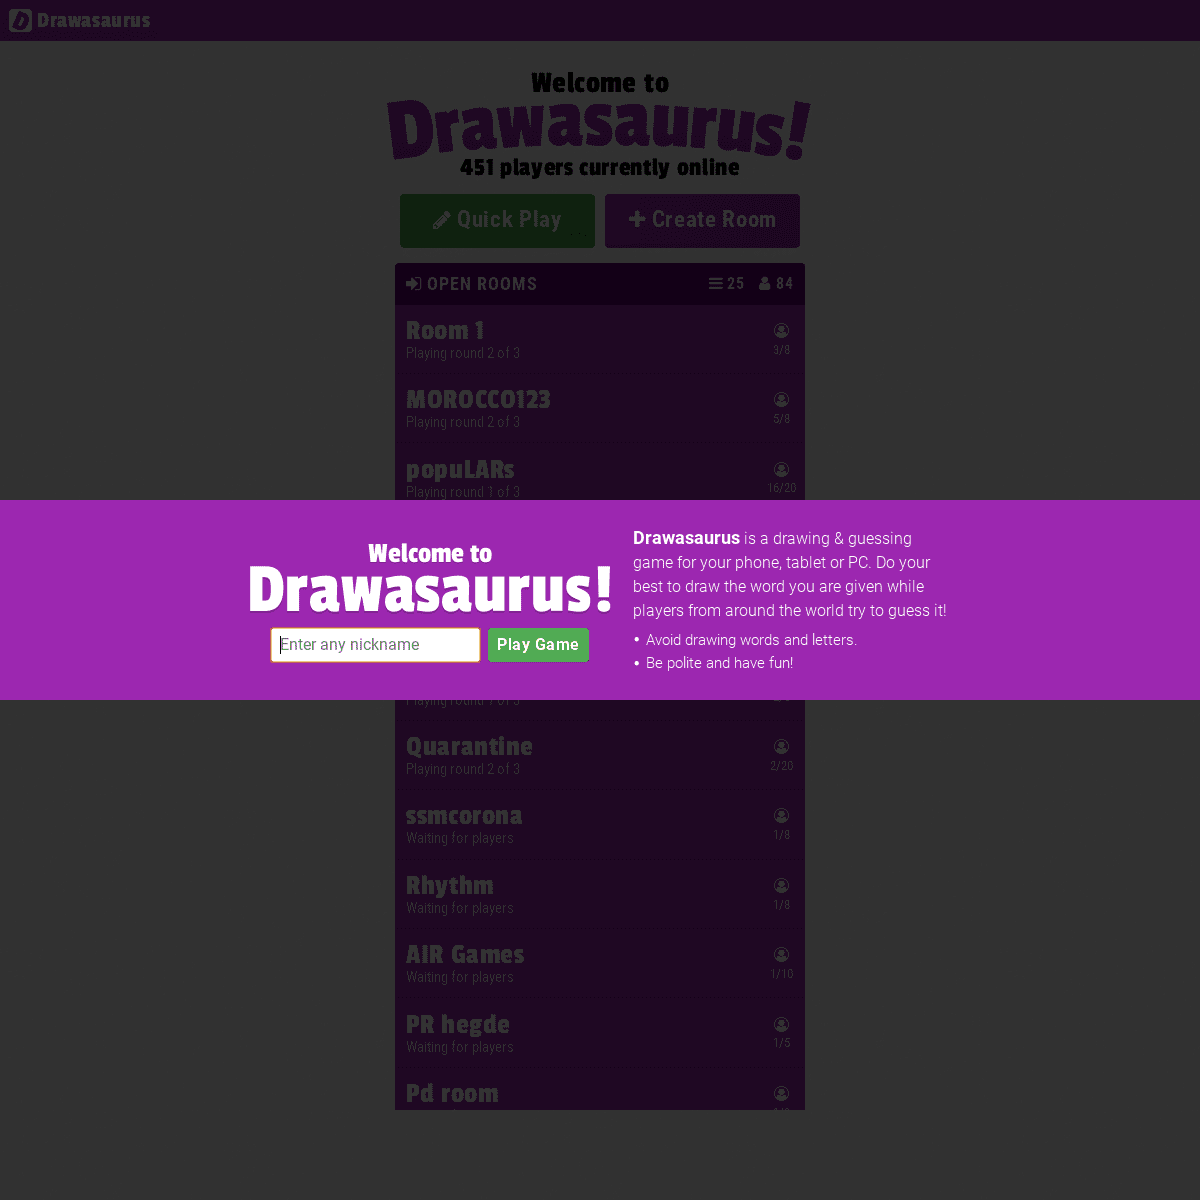 A complete backup of drawasaurus.org